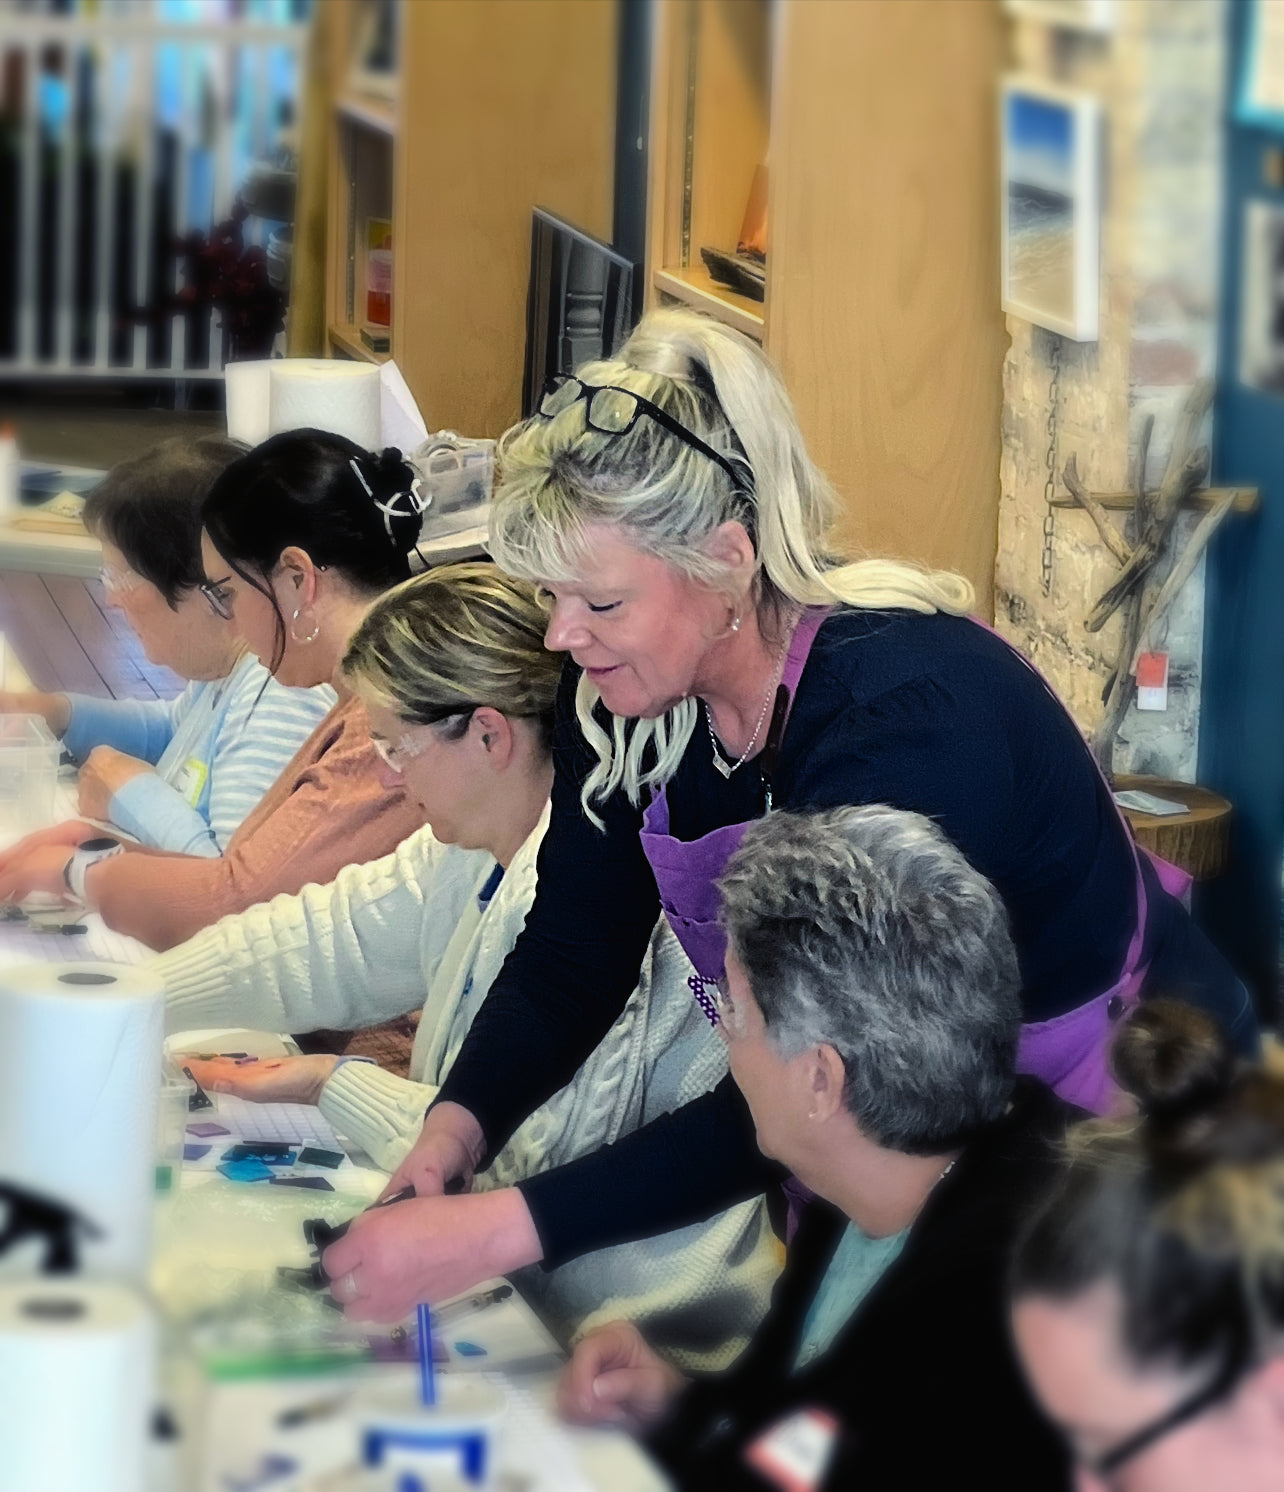 May 18 3pm-5pm Fused Glass Coastal Suncatcher Class at Hang Workshop (Traverse City)